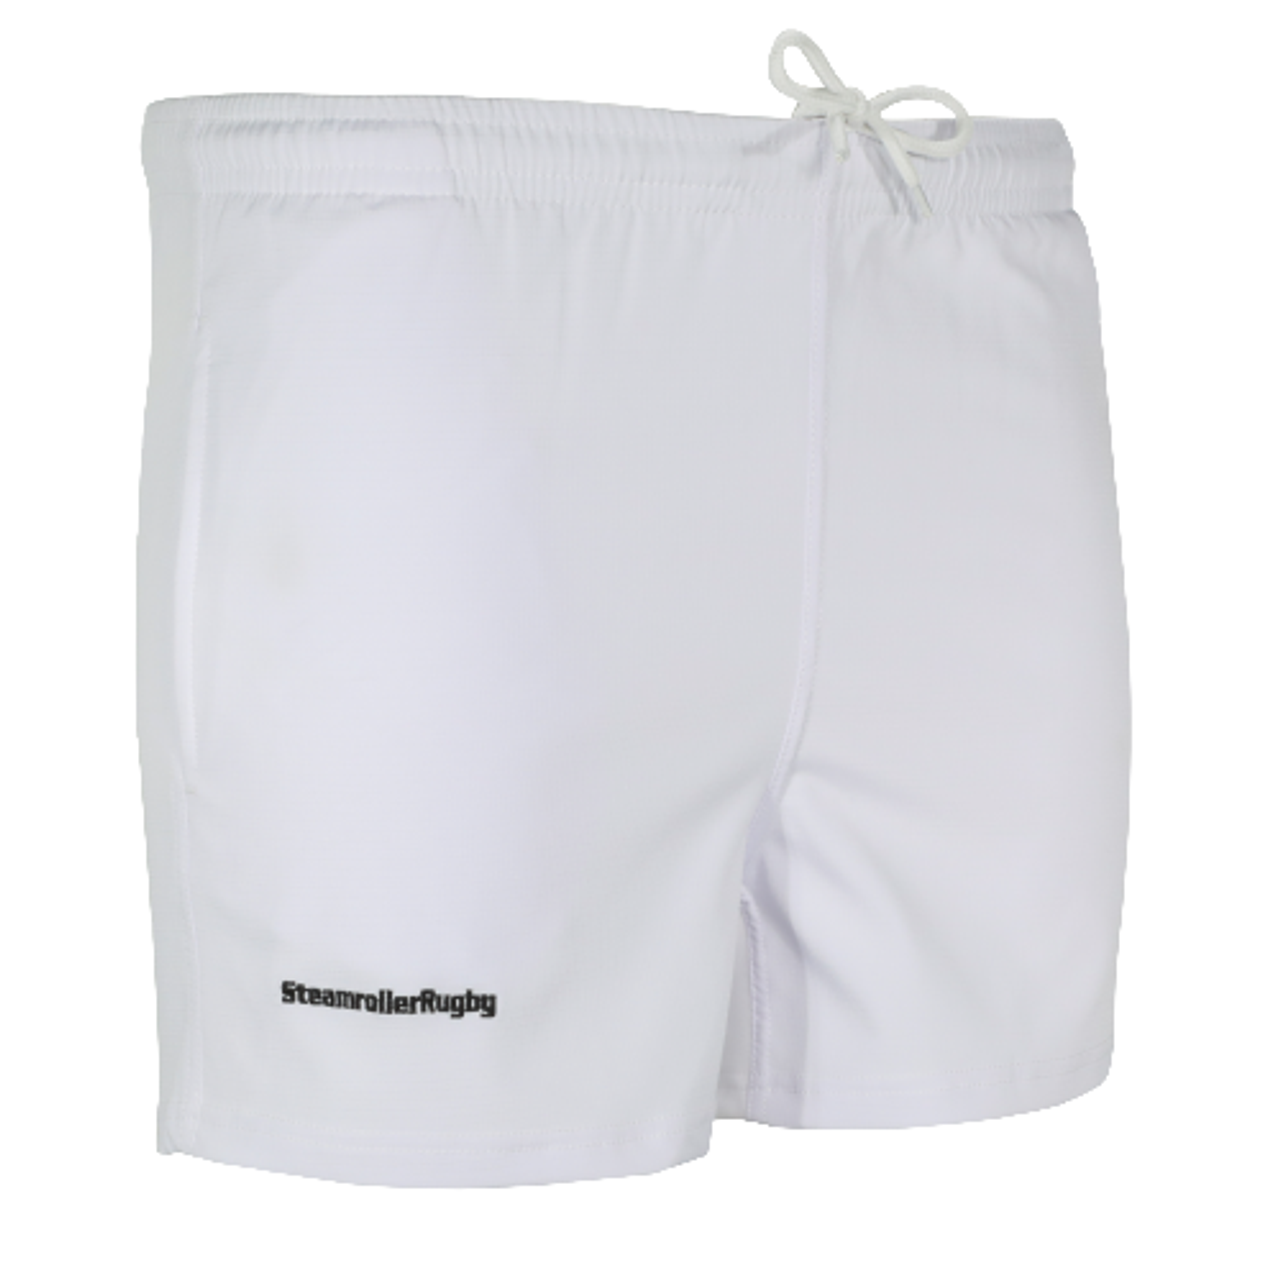 CARFU Referees Pocketed Performance Rugby Shorts, White